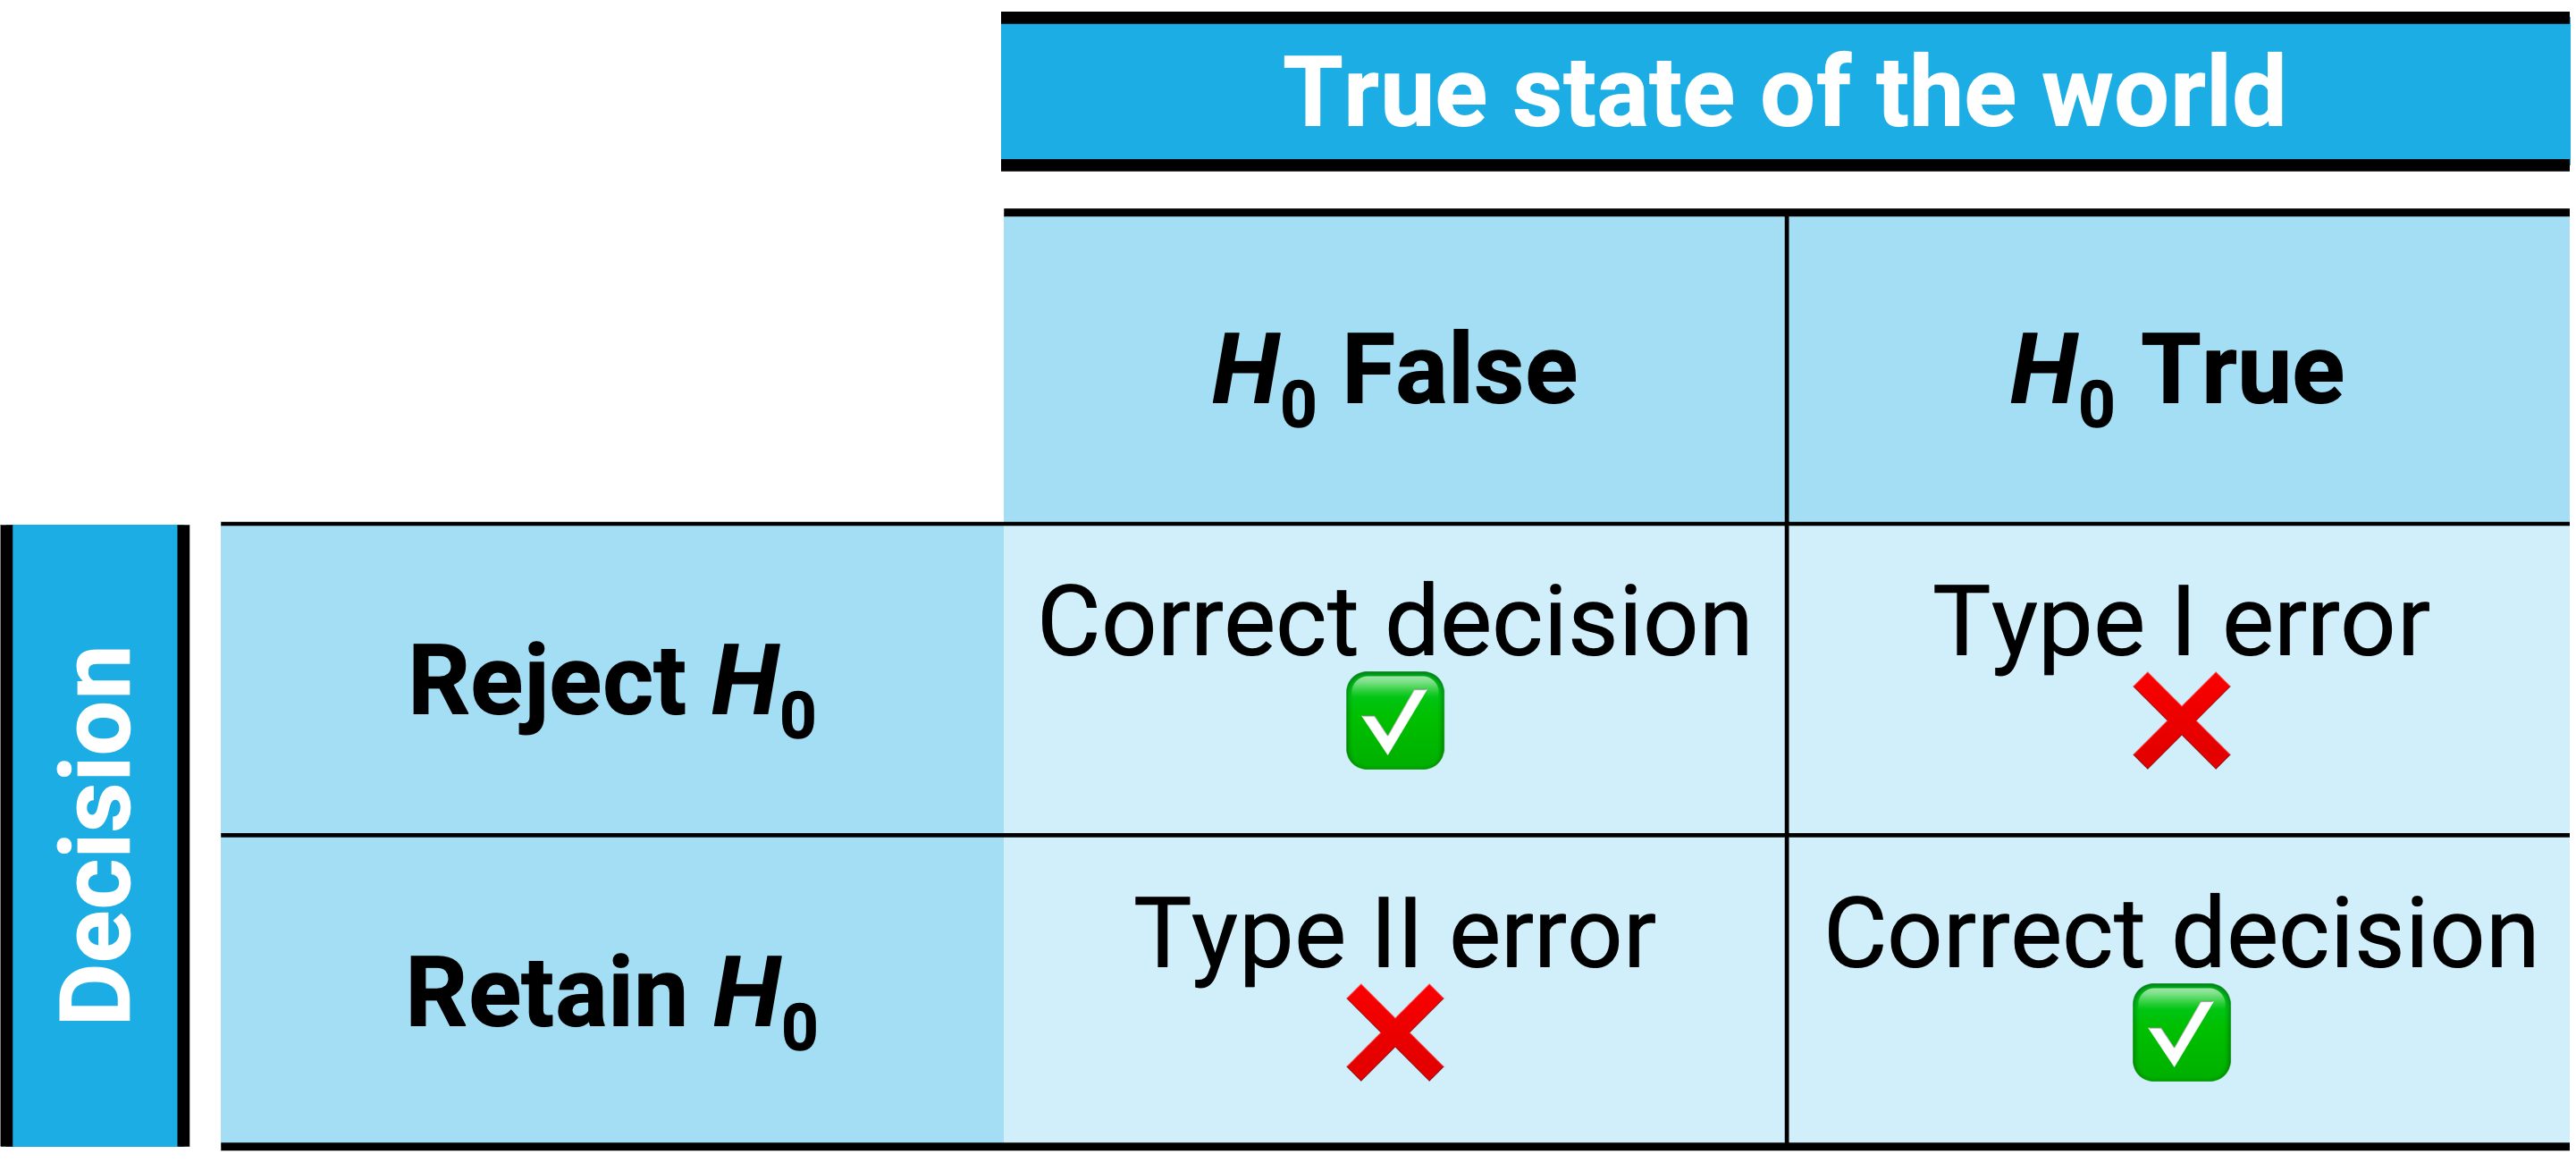 Two types of correct decisions and two types of errors in null hypothesis testing.